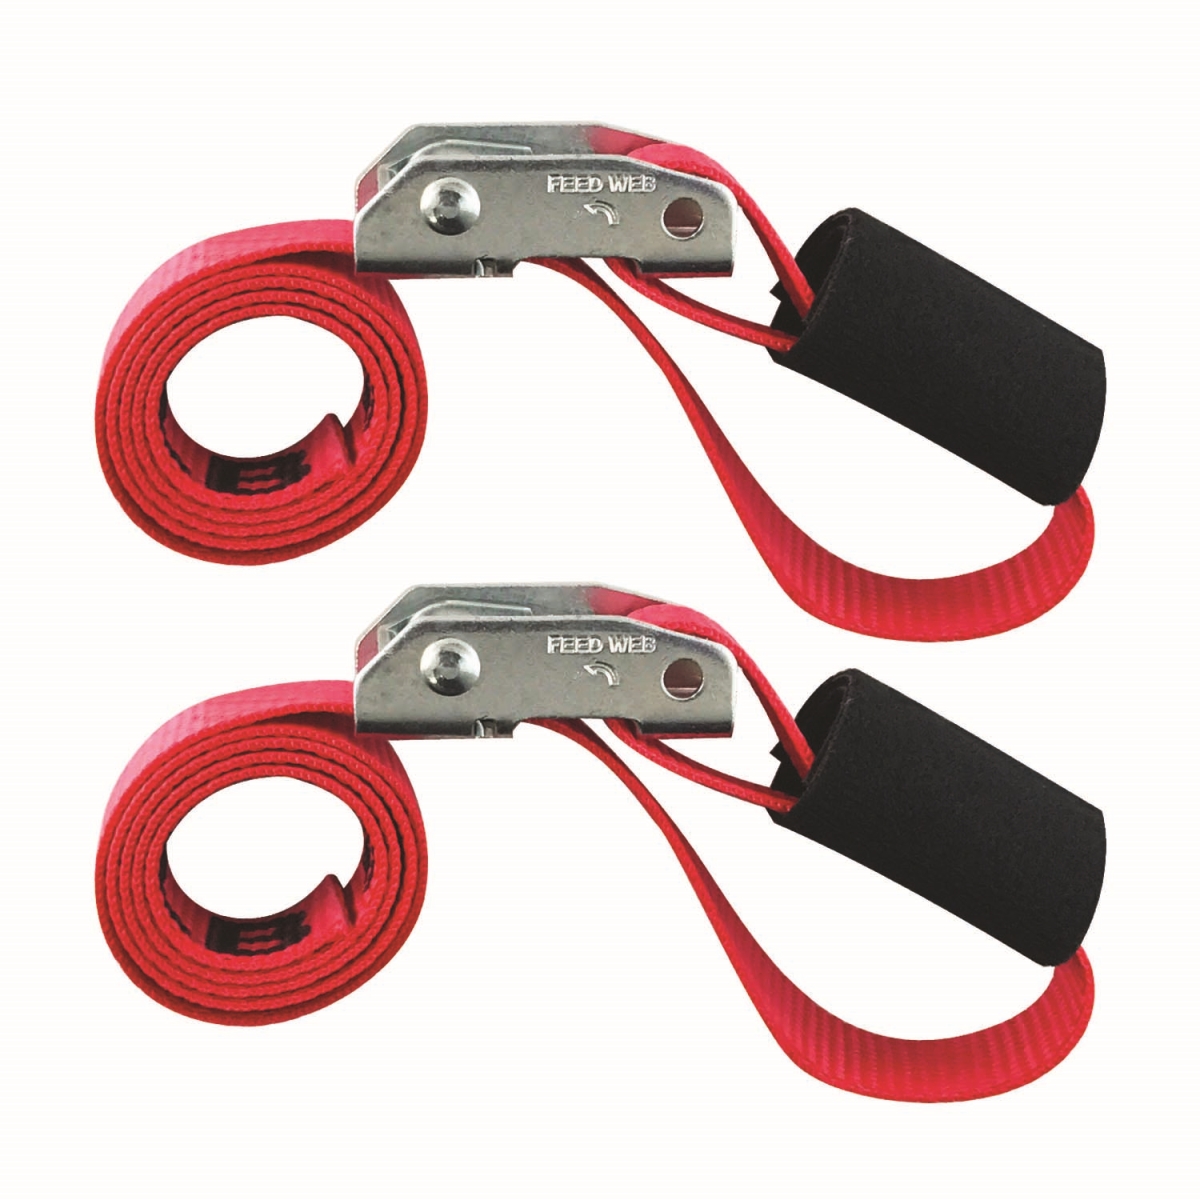 Sltc103cr2 1 In. X 3 Ft. Cinch Cam Strap - Red, Pack Of 2